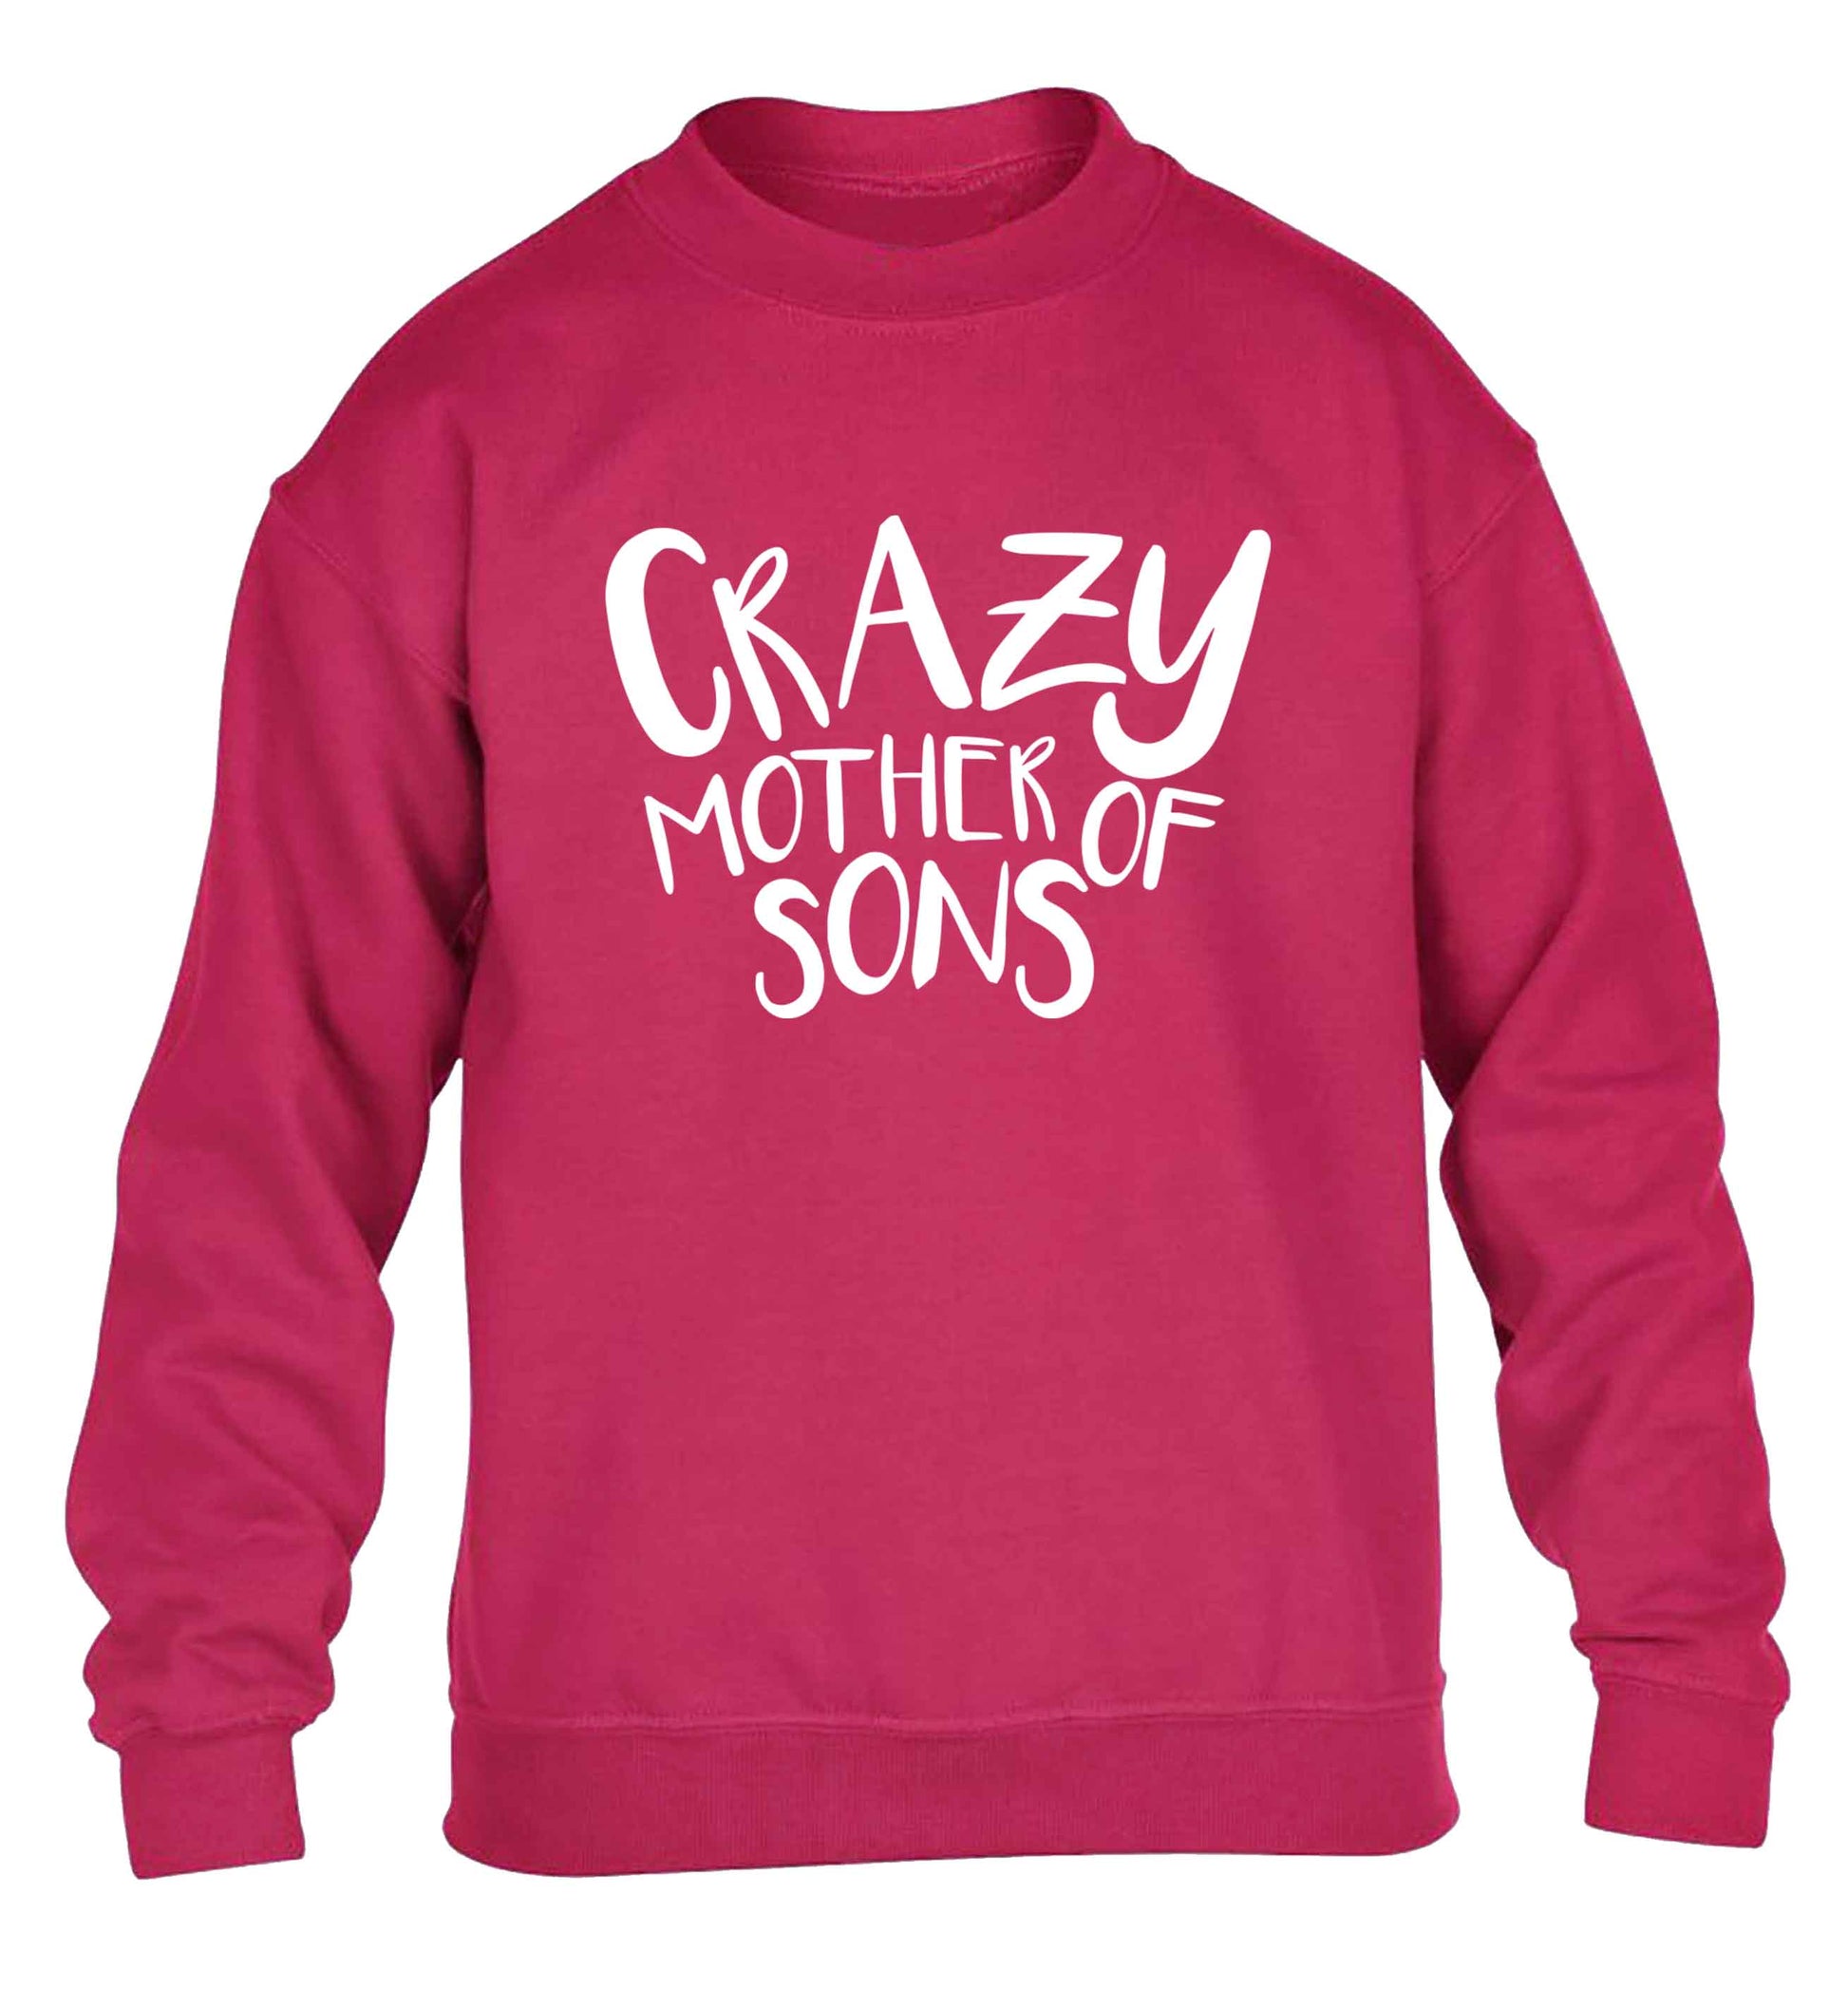 Crazy mother of sons children's pink sweater 12-13 Years